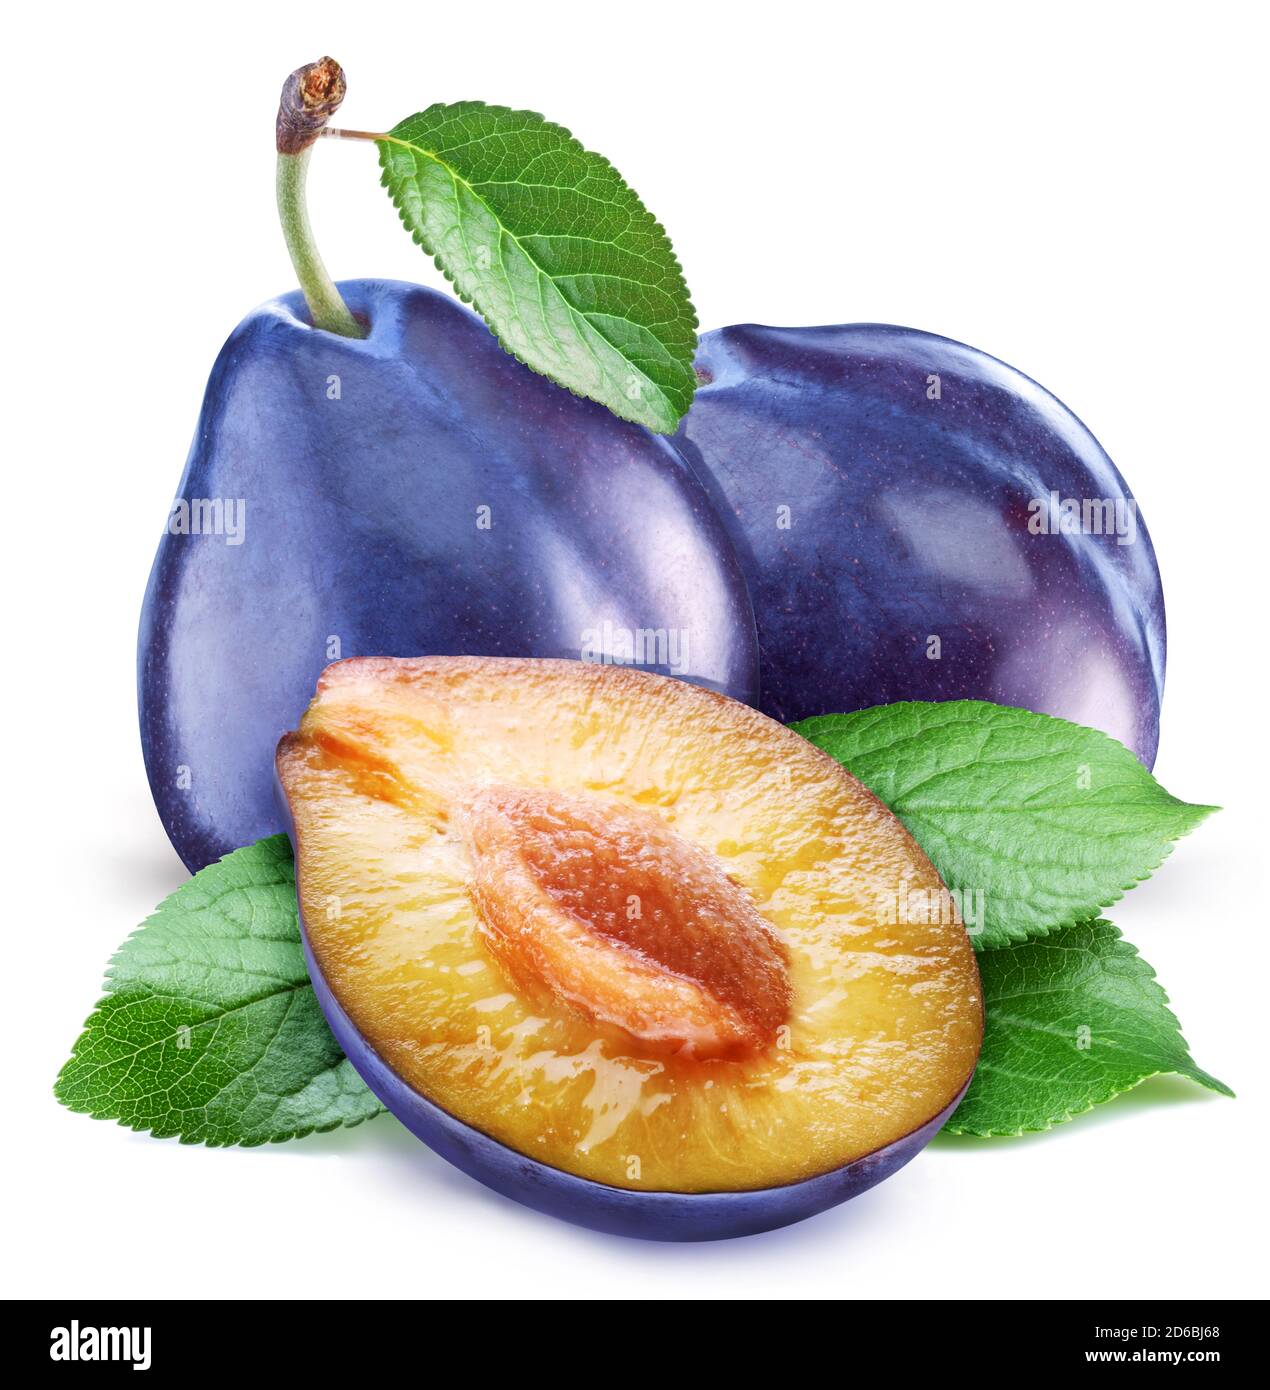 Plums with leaves and plum slices isolated on a white background. Clipping path. Stock Photo